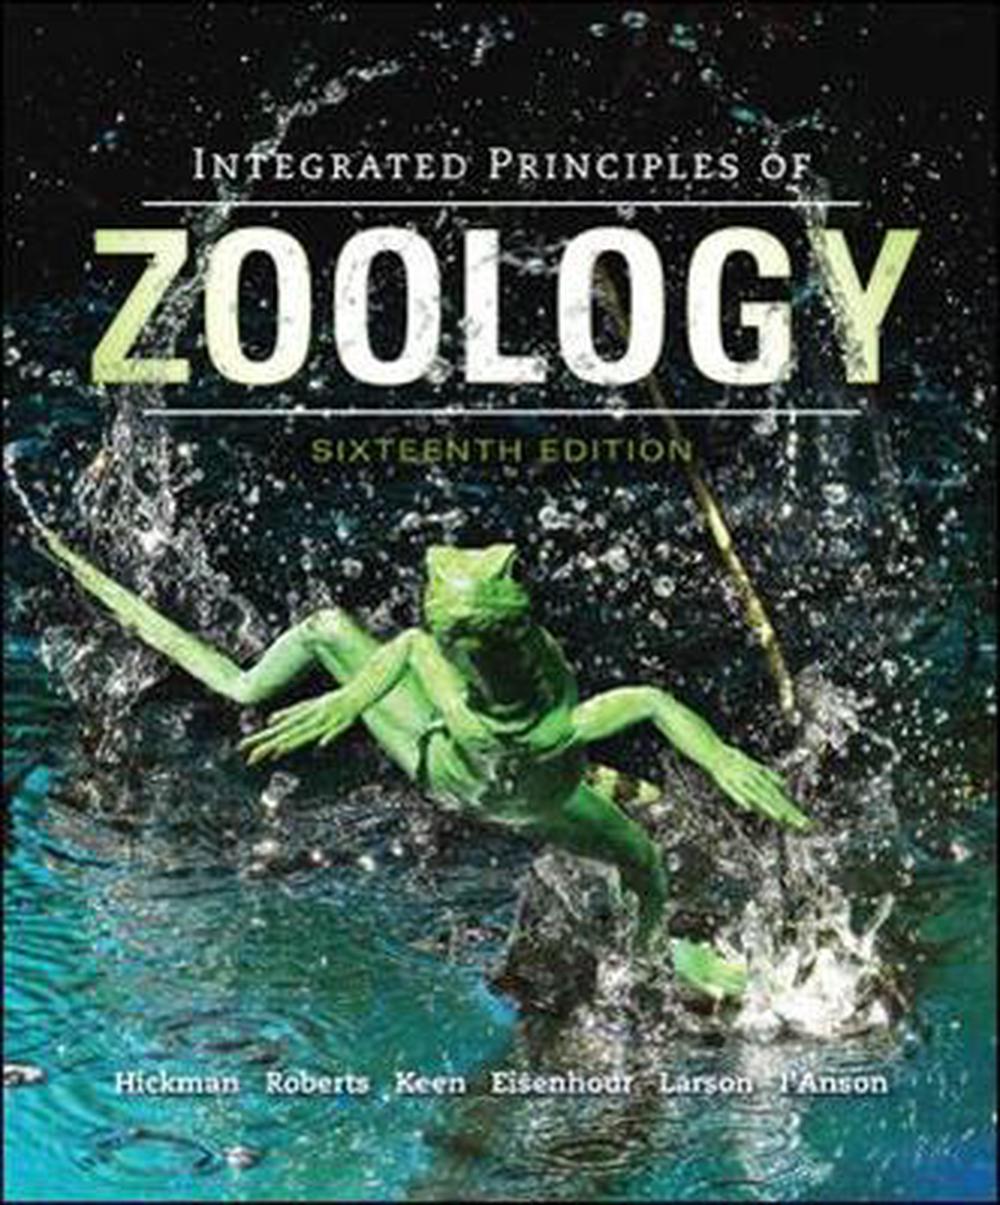 Integrated Principles of Zoology, 16th Edition by Cleveland P. Jr. Hickman, Hardcover